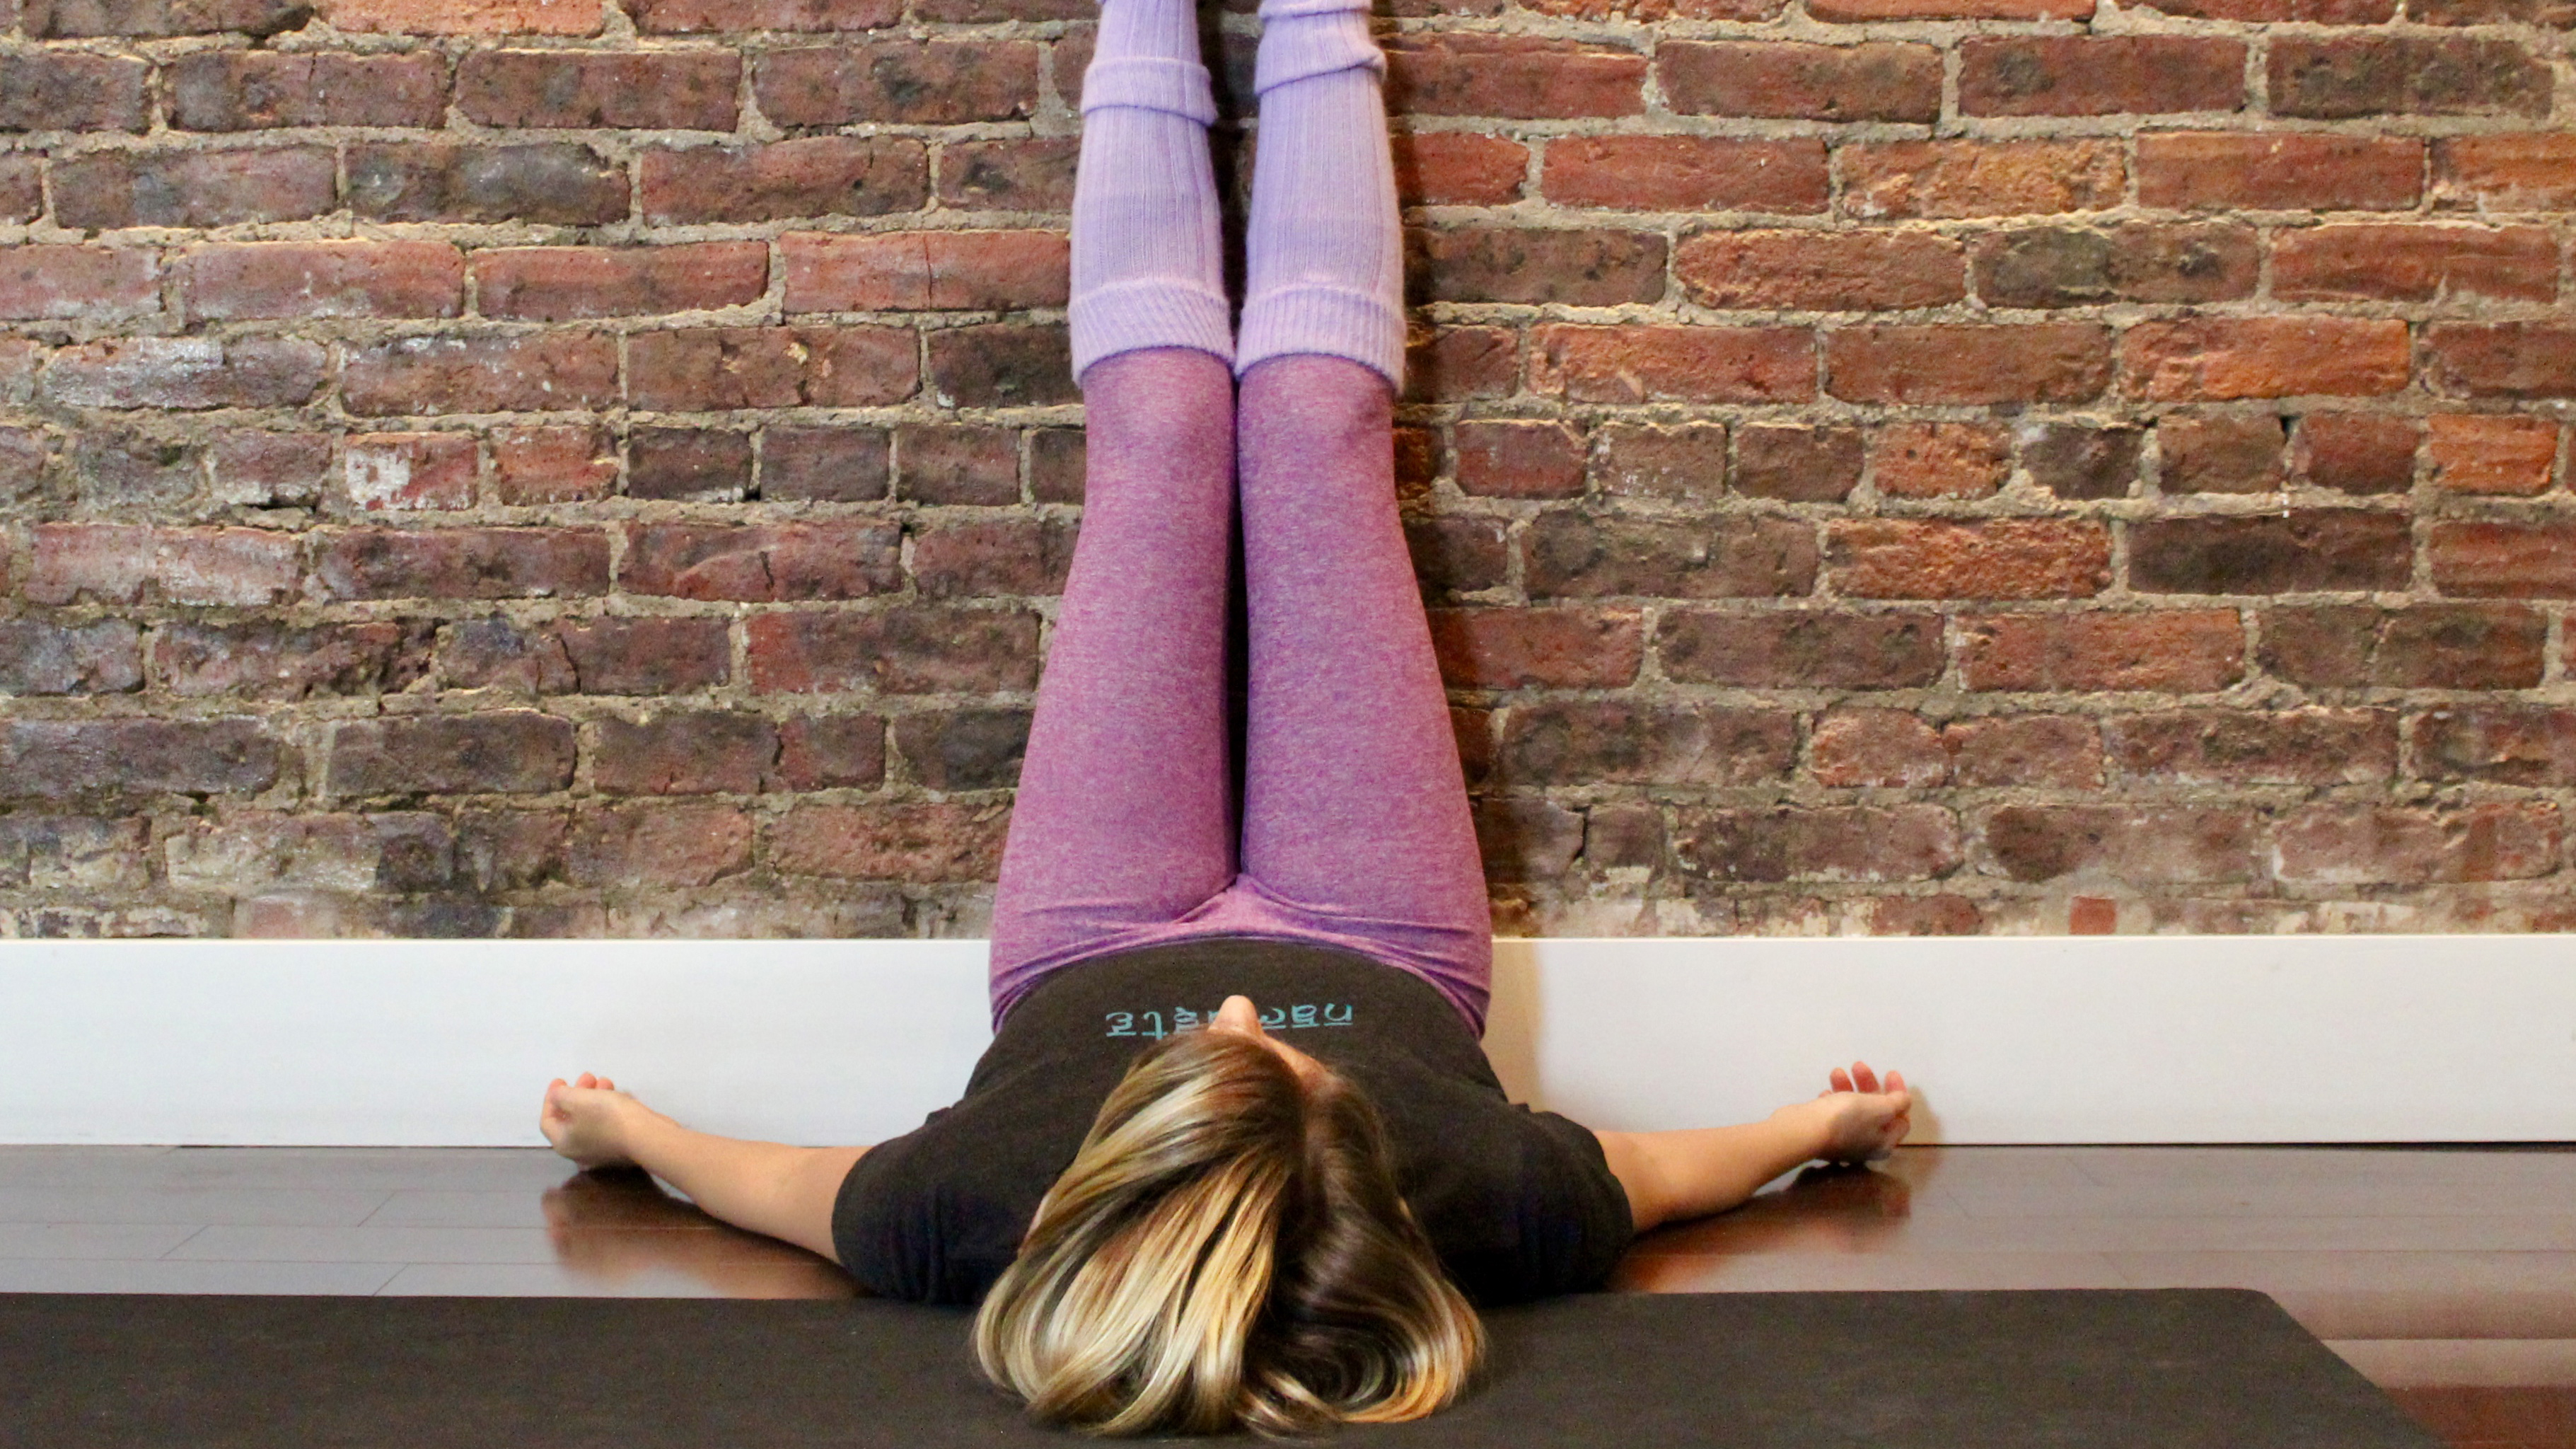 6 ways to stop sciatic nerve pain with yoga